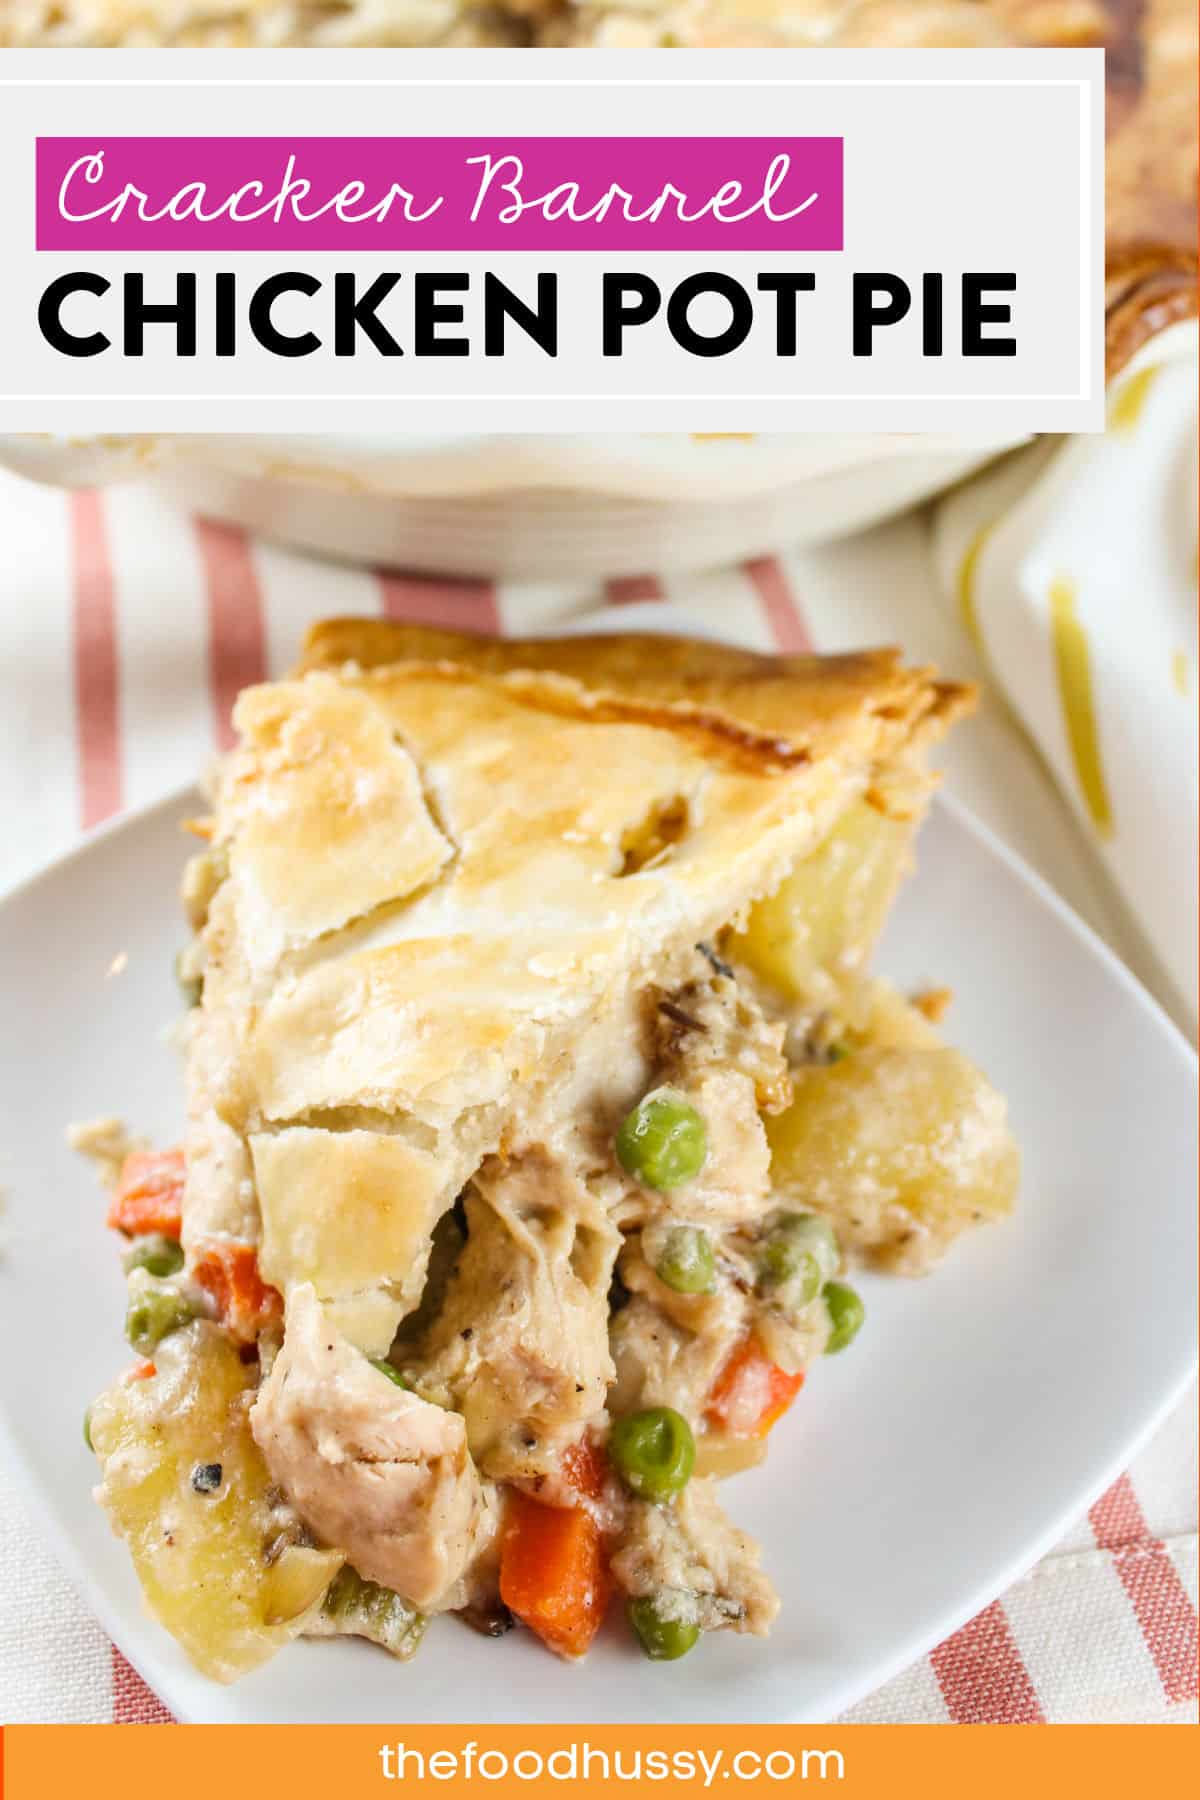 Cracker Barrel Chicken Pot Pie is a menu favorite loved by adults and kids alike! That flaky pastry crust, stuffed full with slow-simmered chicken, creamy sauce and lots of vegetables - it's comfort food at its finest!  via @foodhussy